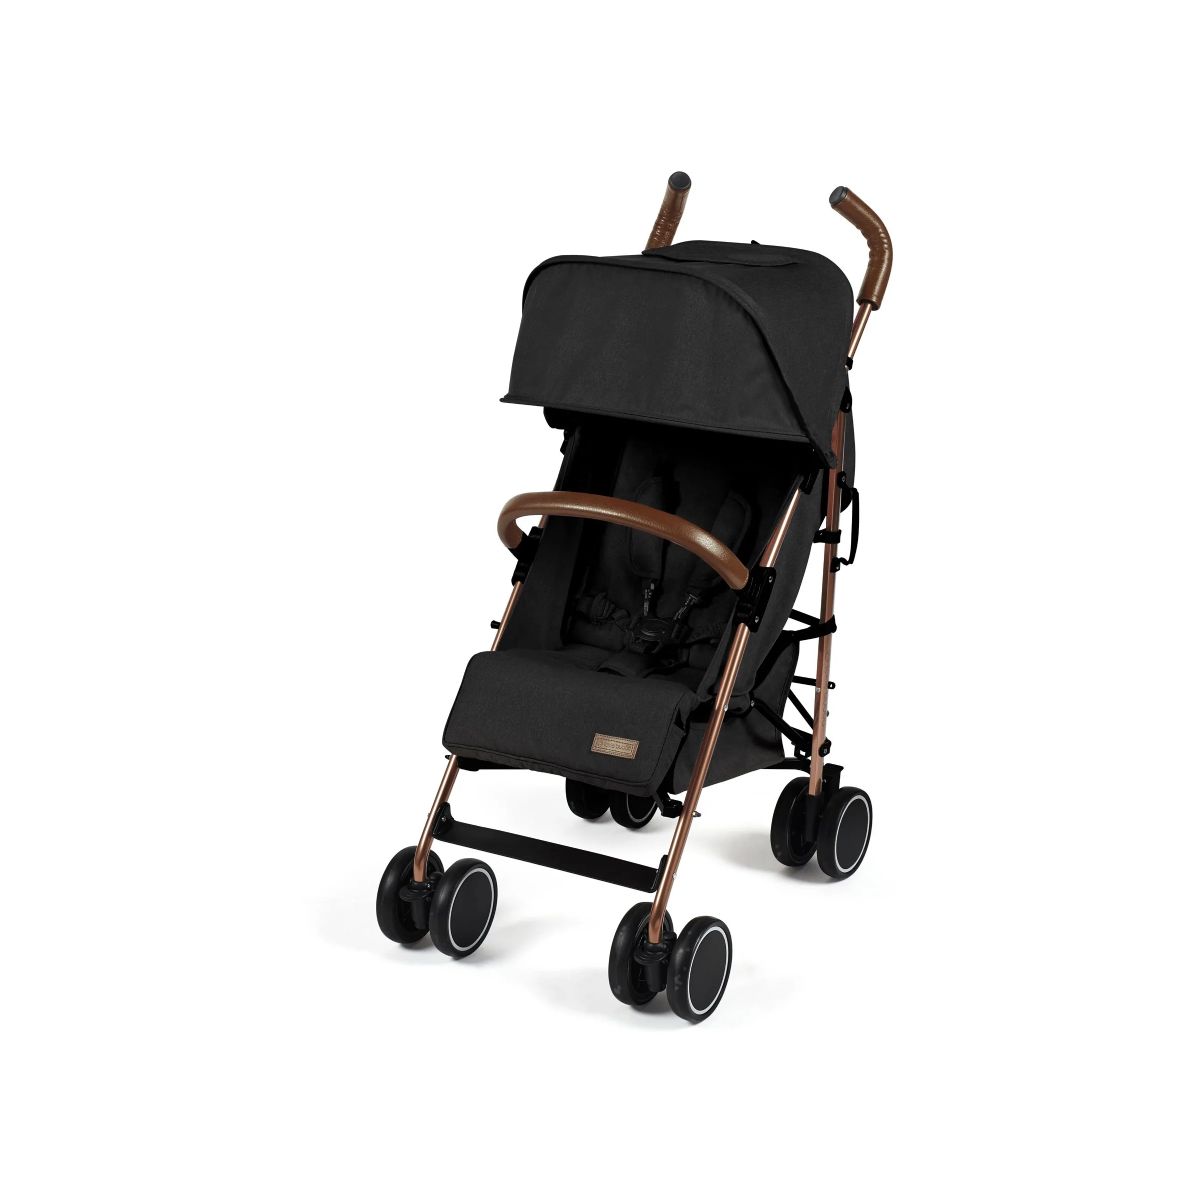 https://www.kiddies-kingdom.com/201970-thickbox_default/ickle-bubba-discovery-rose-gold-chassis-pushchair-black.jpg